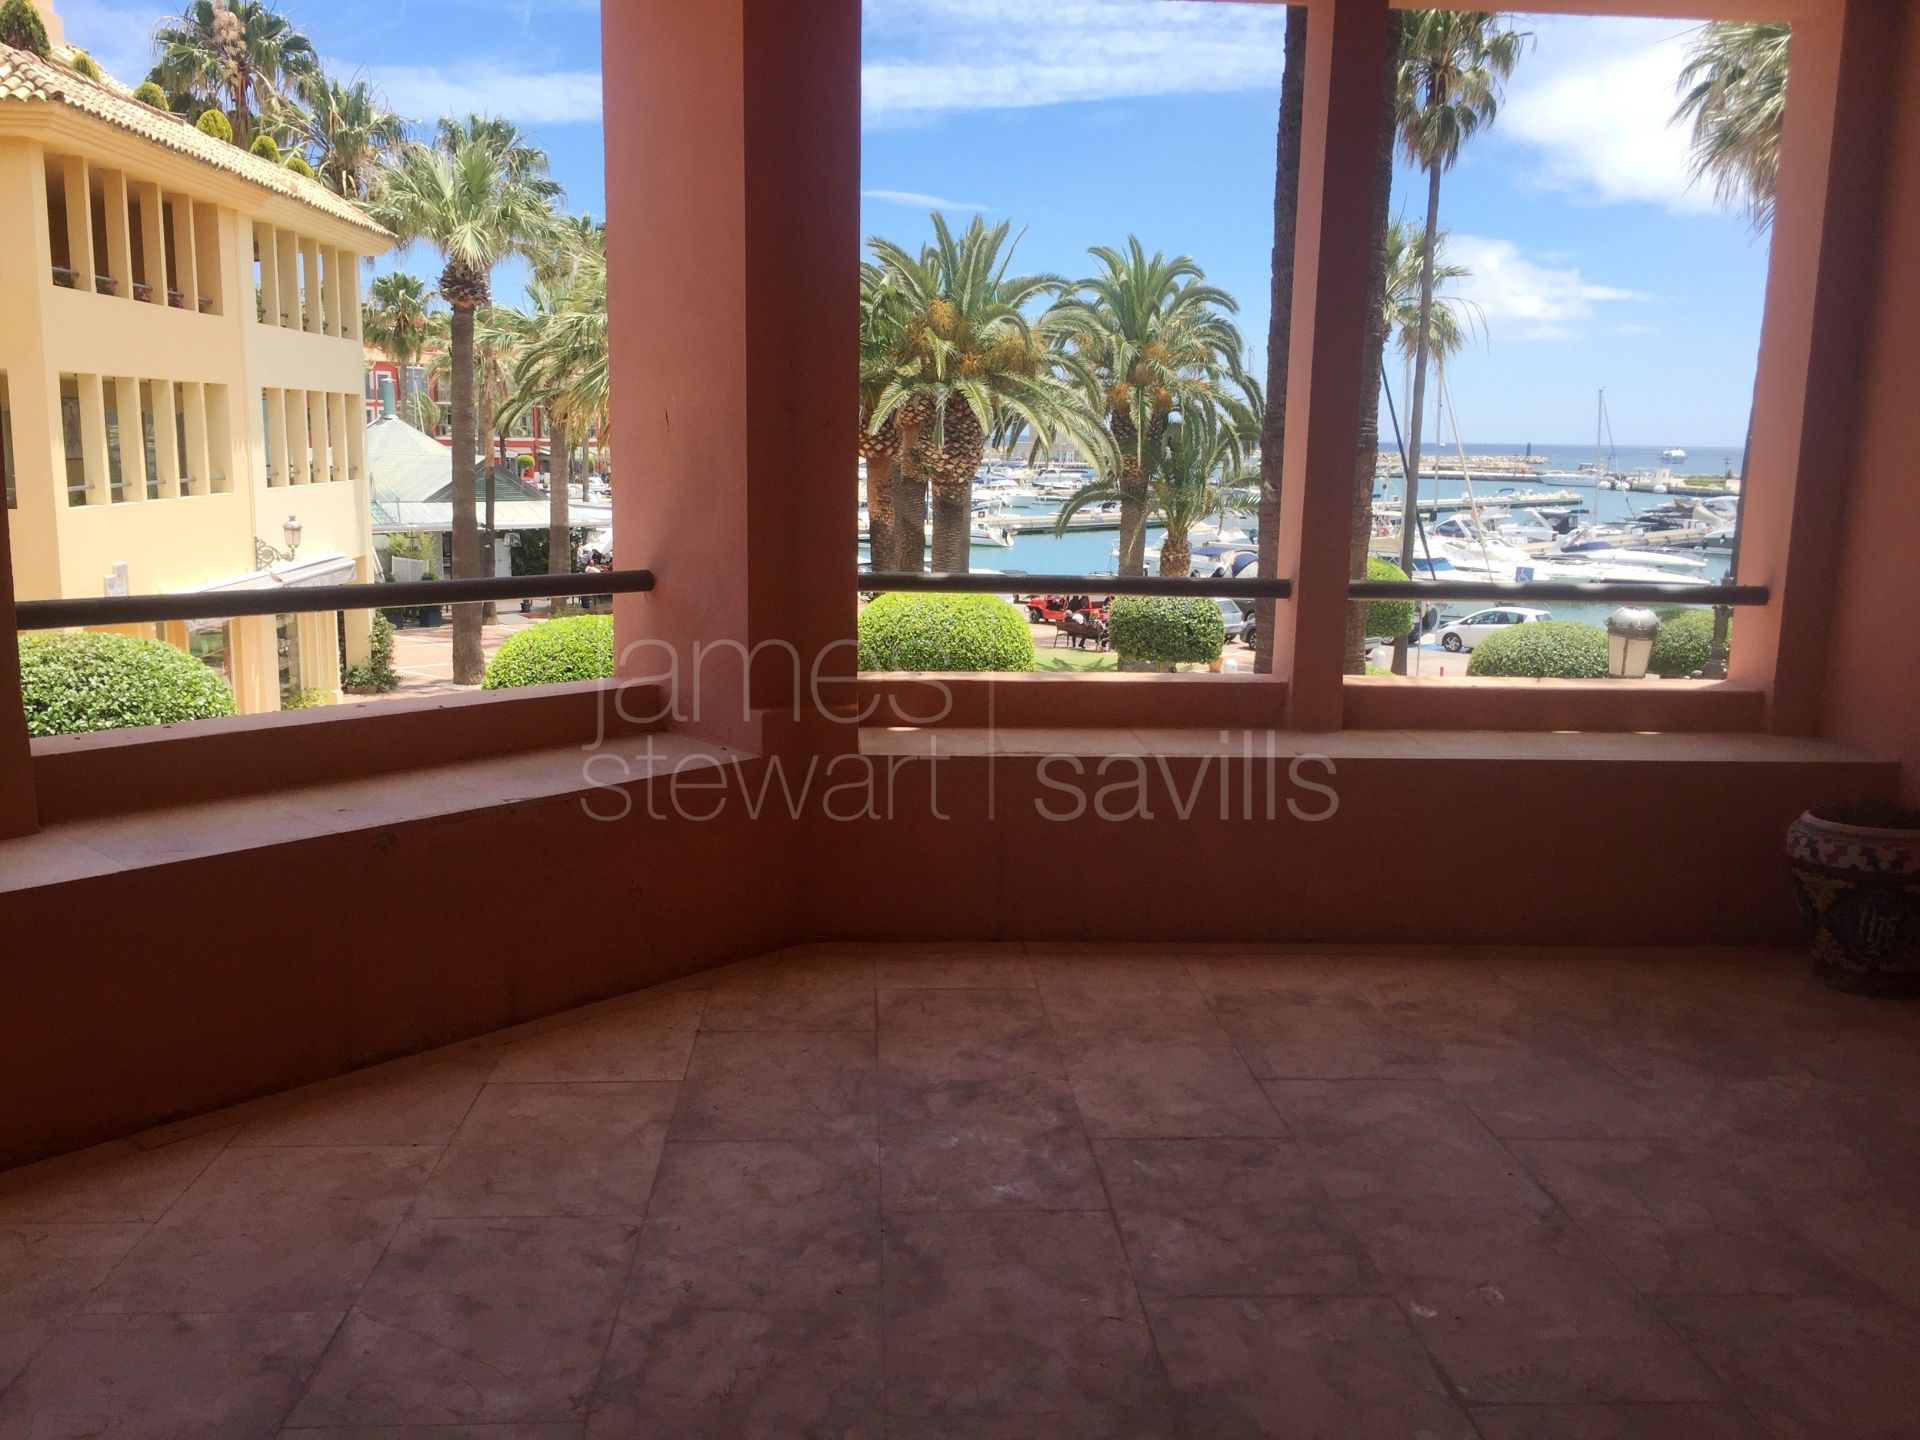 Bright and spacious 3 bedroom apartment with port and sea views